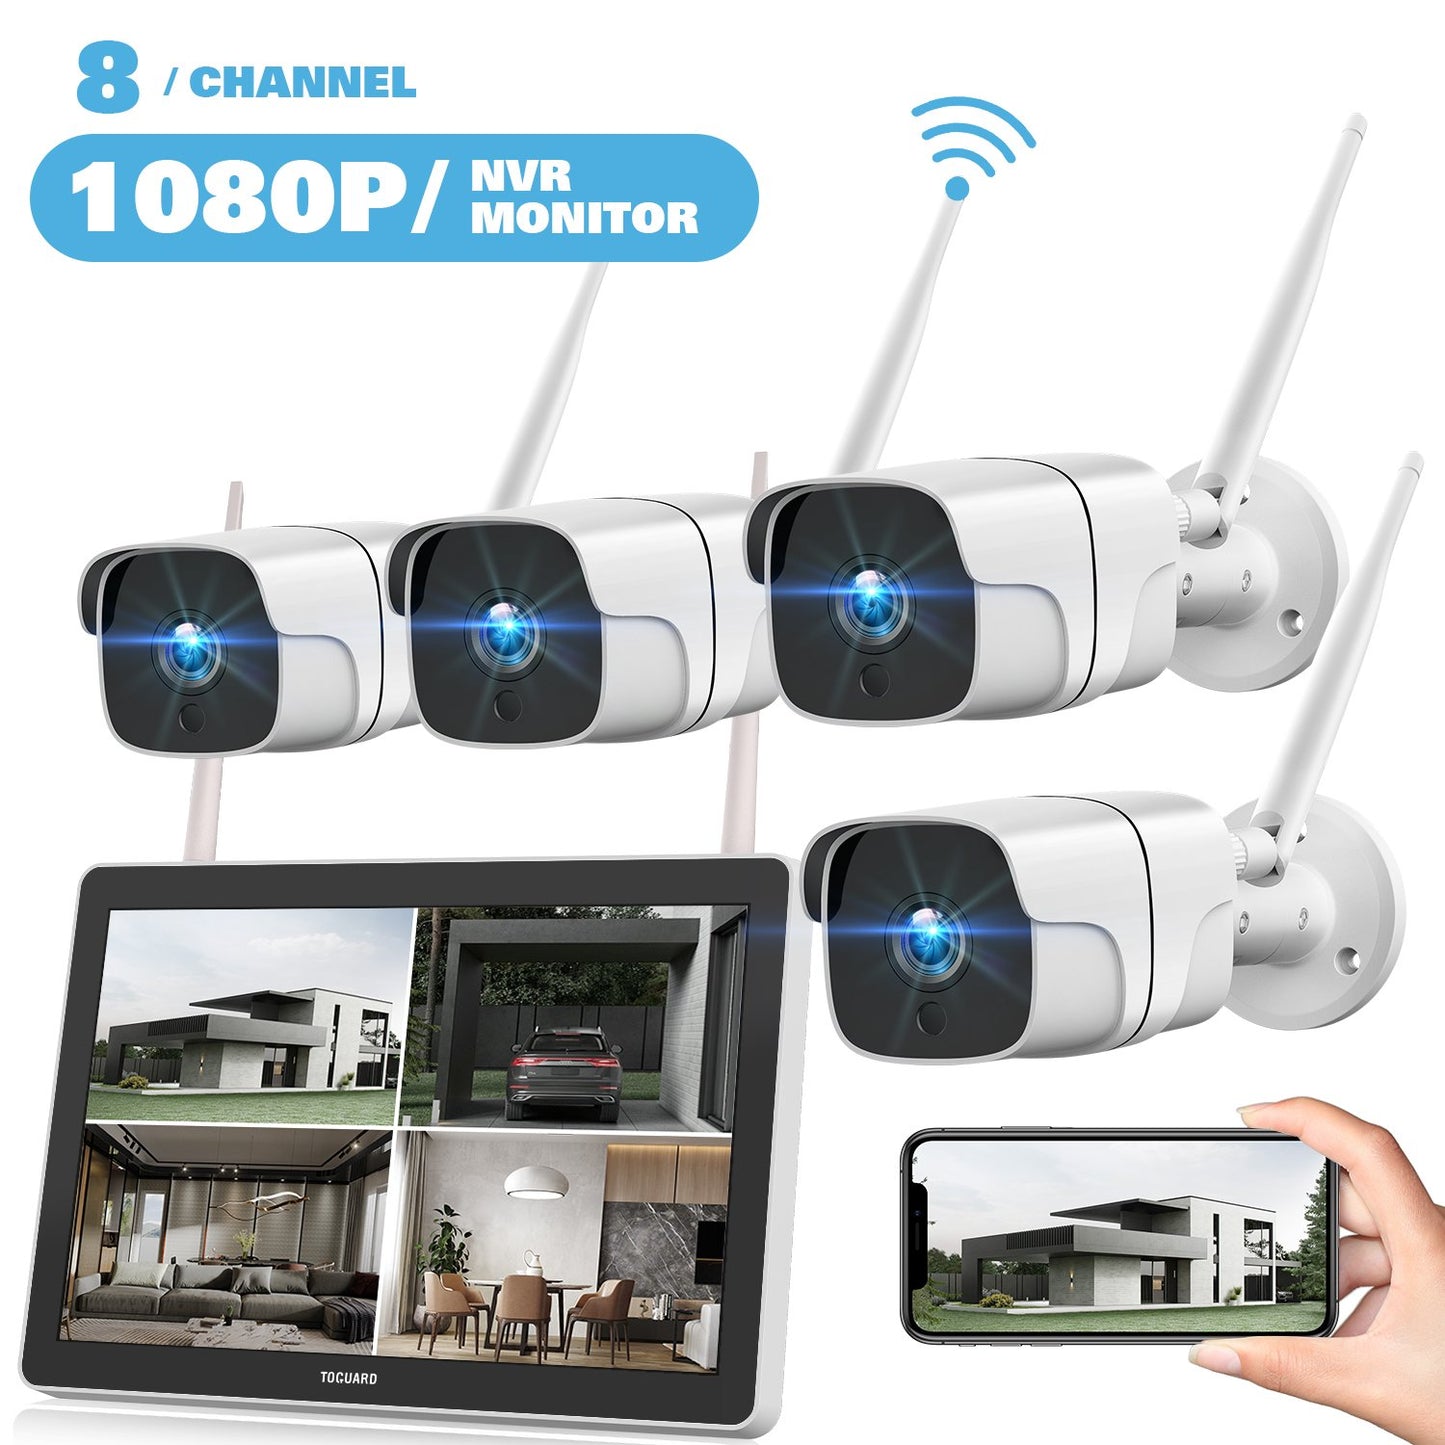 Toguard W400 1080P Wireless Security Camera System with 12 inch LCD Monitor, 8CH NVR 4Pcs WiFi Outdoor Home Surveillance Camera